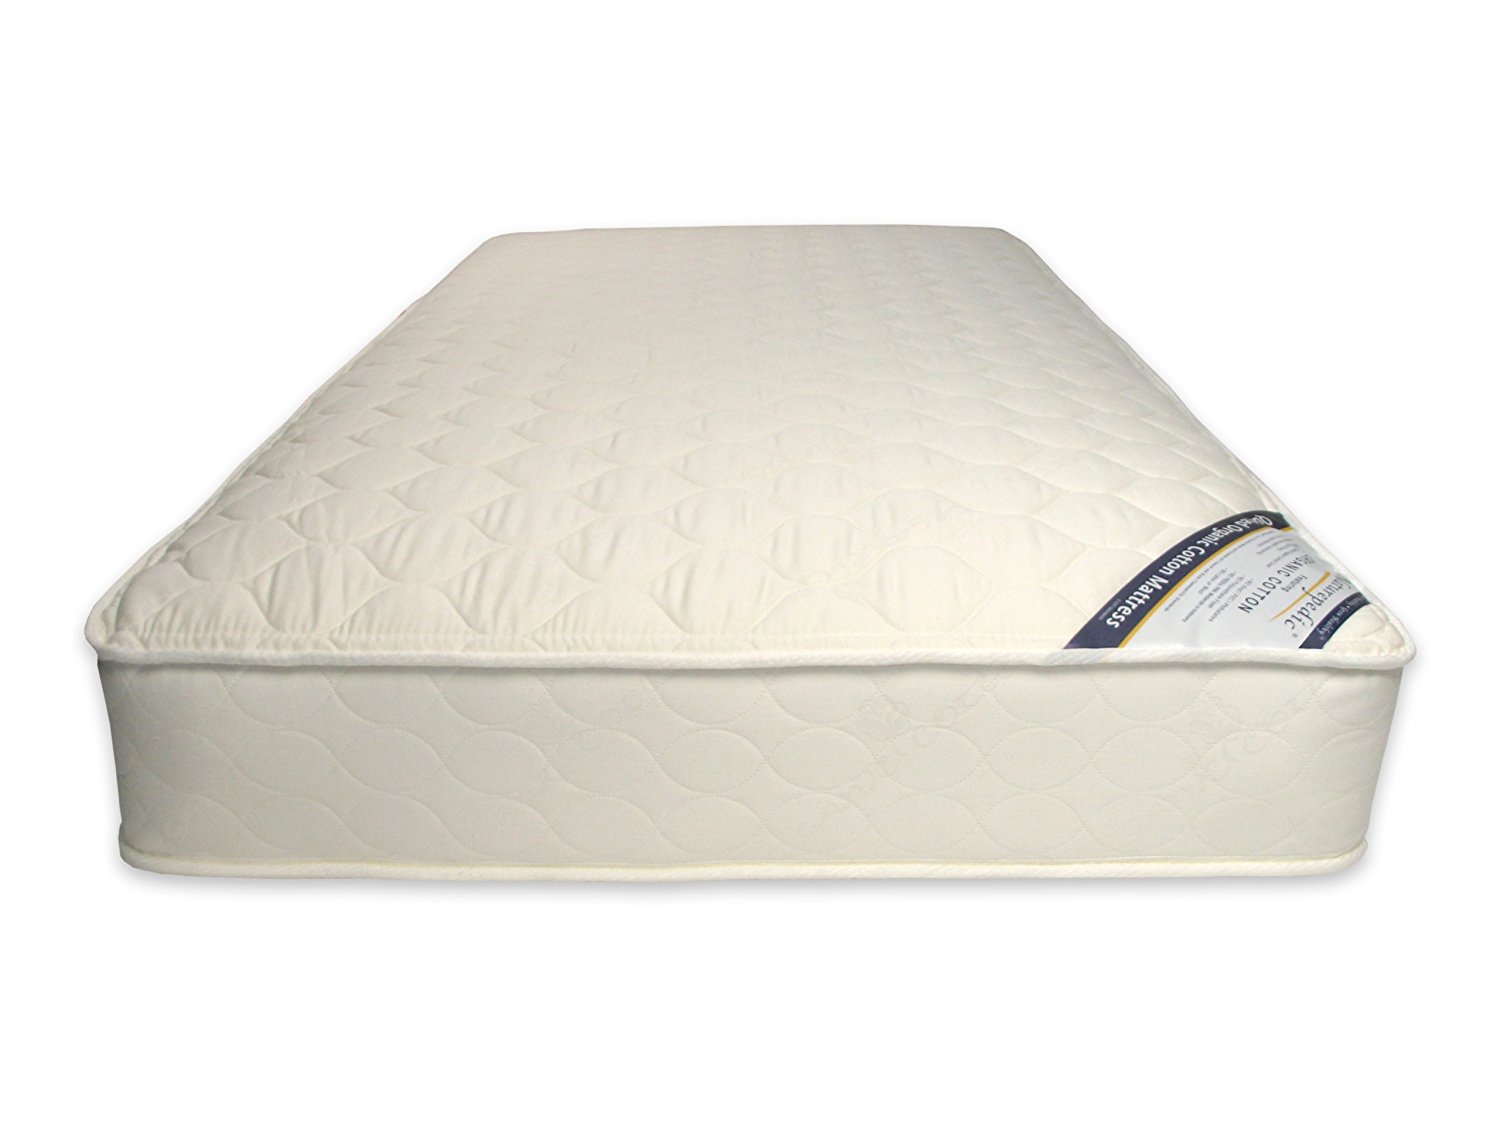 non-toxic bed mattress that prevents bed sores